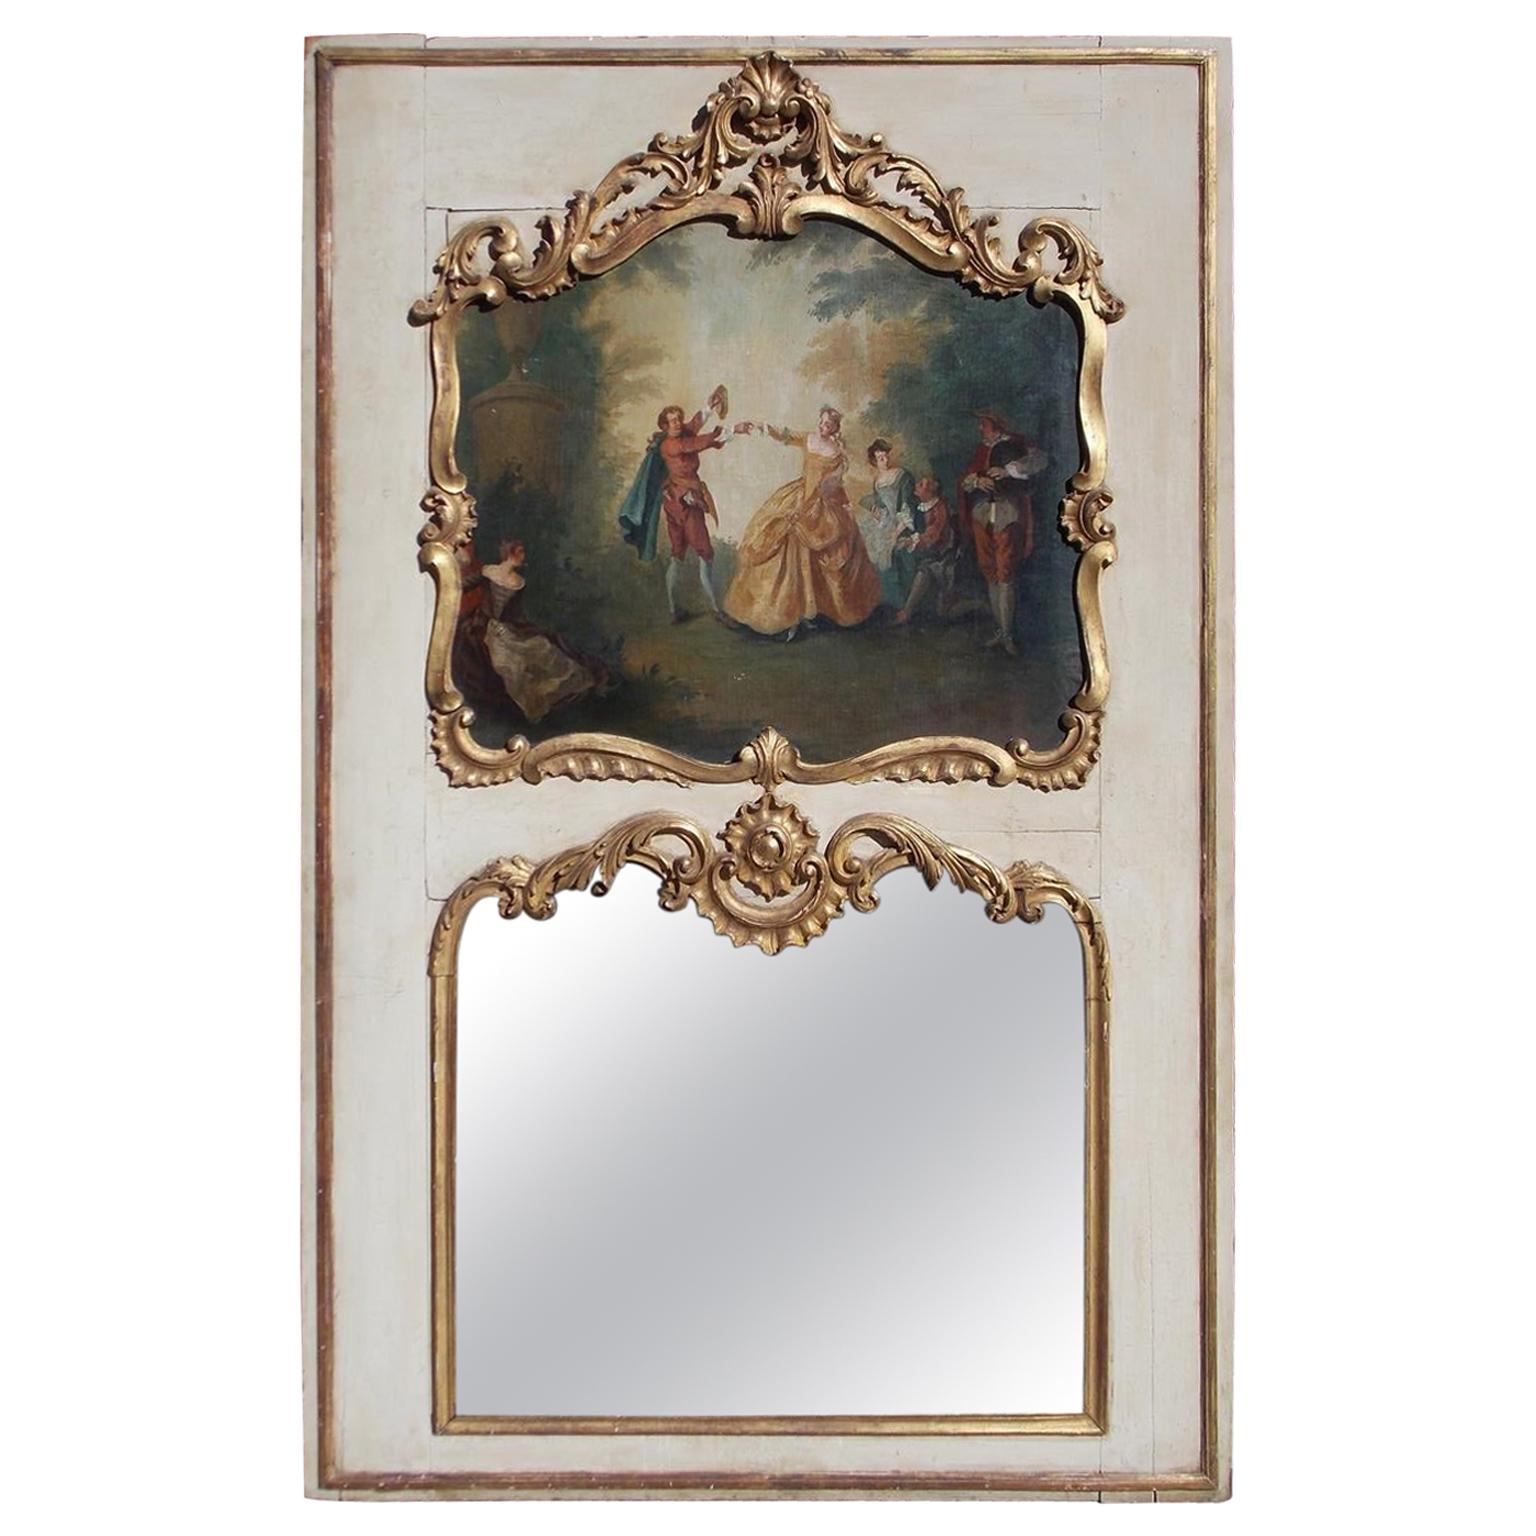 French Louis XV Gilt and Painted Decorative Floral Trumeau Mirror, Circa 1750